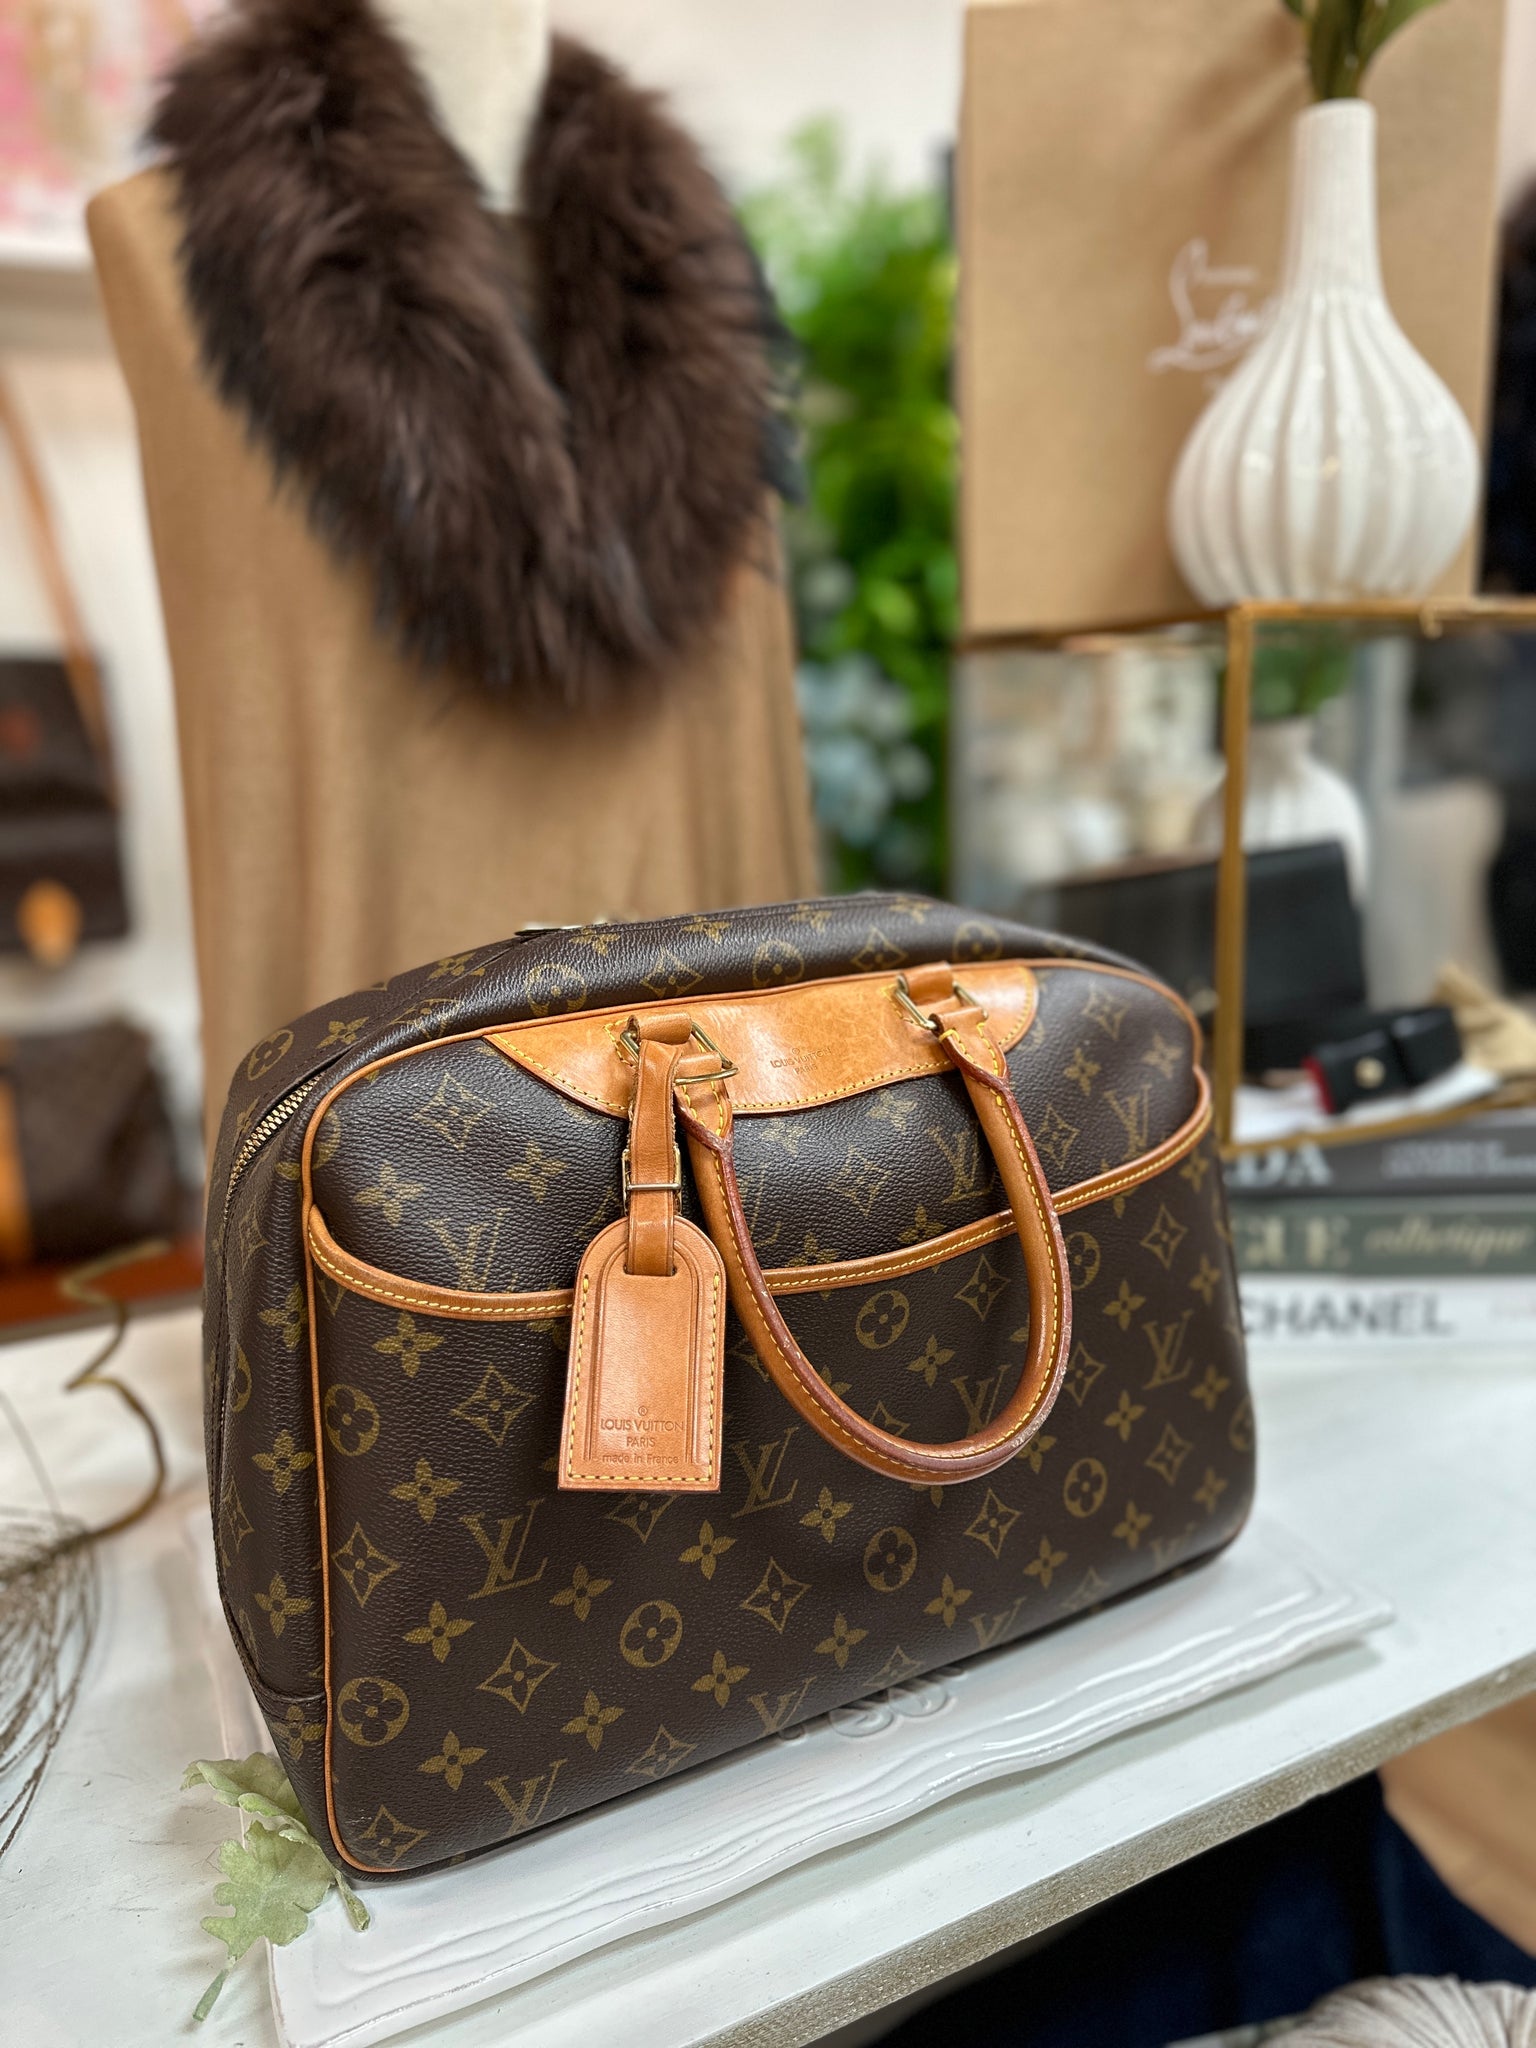 Louis Vuitton - Authenticated Vanity Handbag - Cloth Brown Plain for Women, Very Good Condition